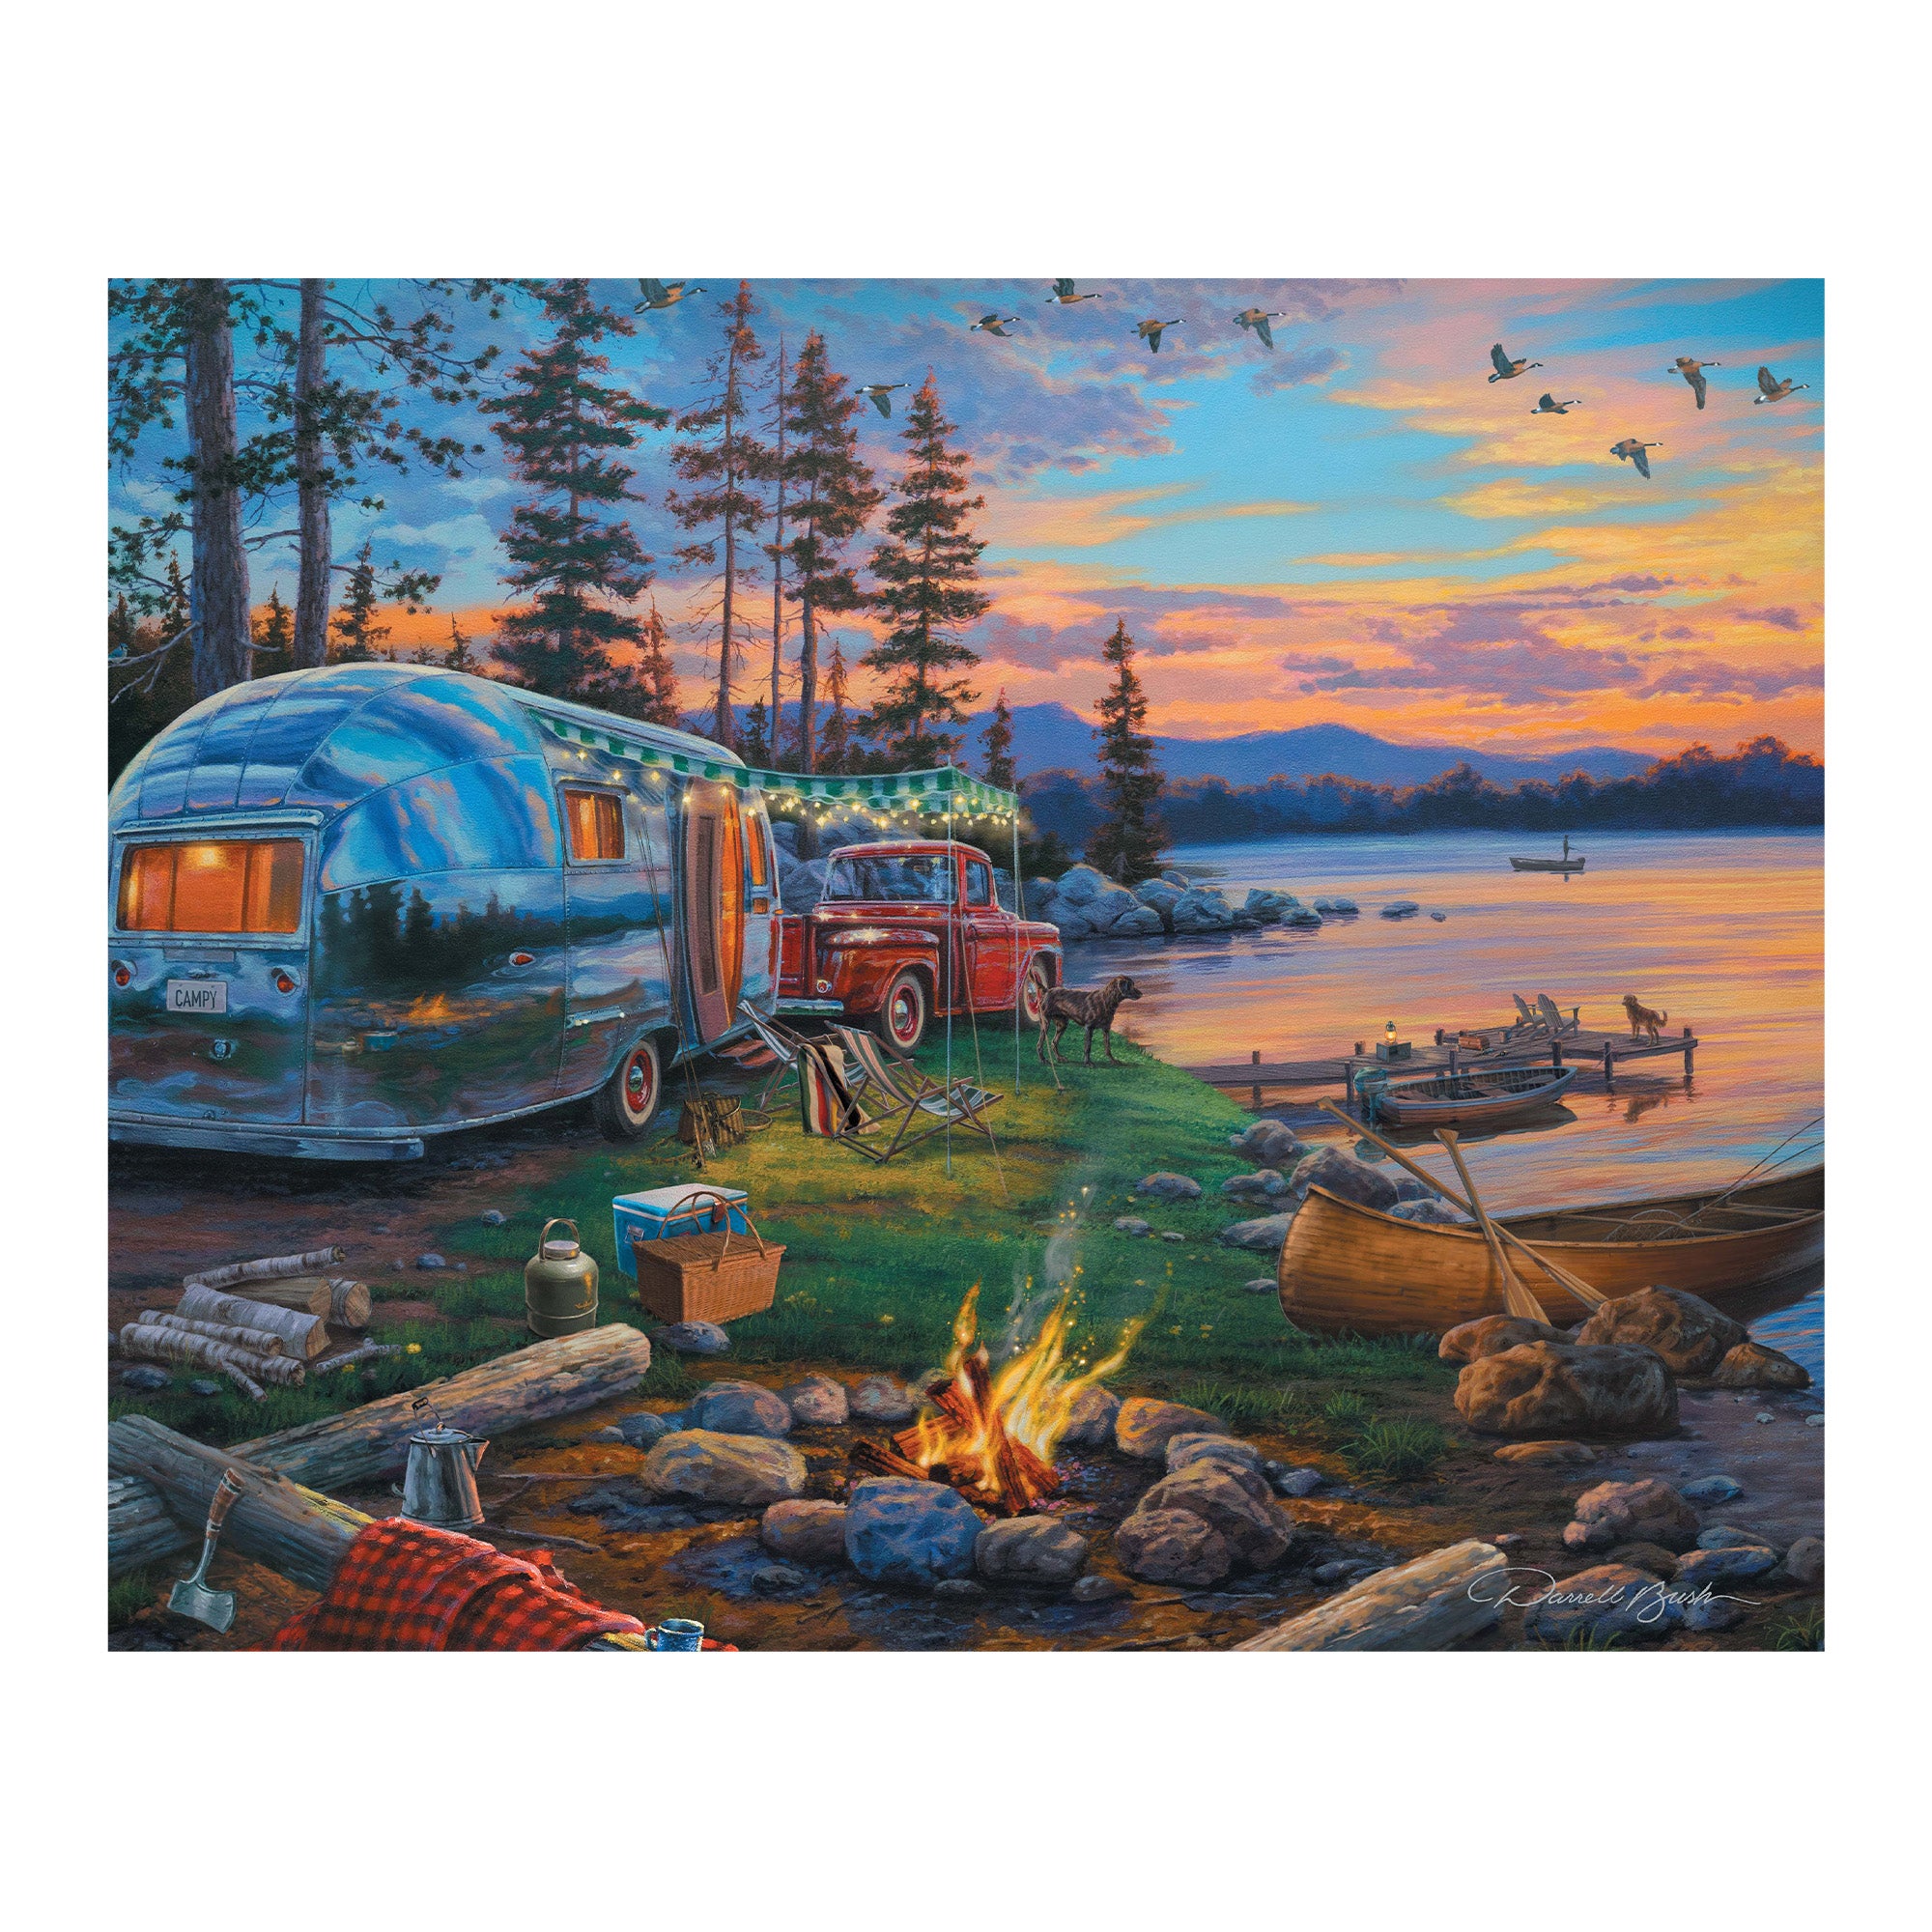 100 piece jigsaw puzzle - Great Outdoors